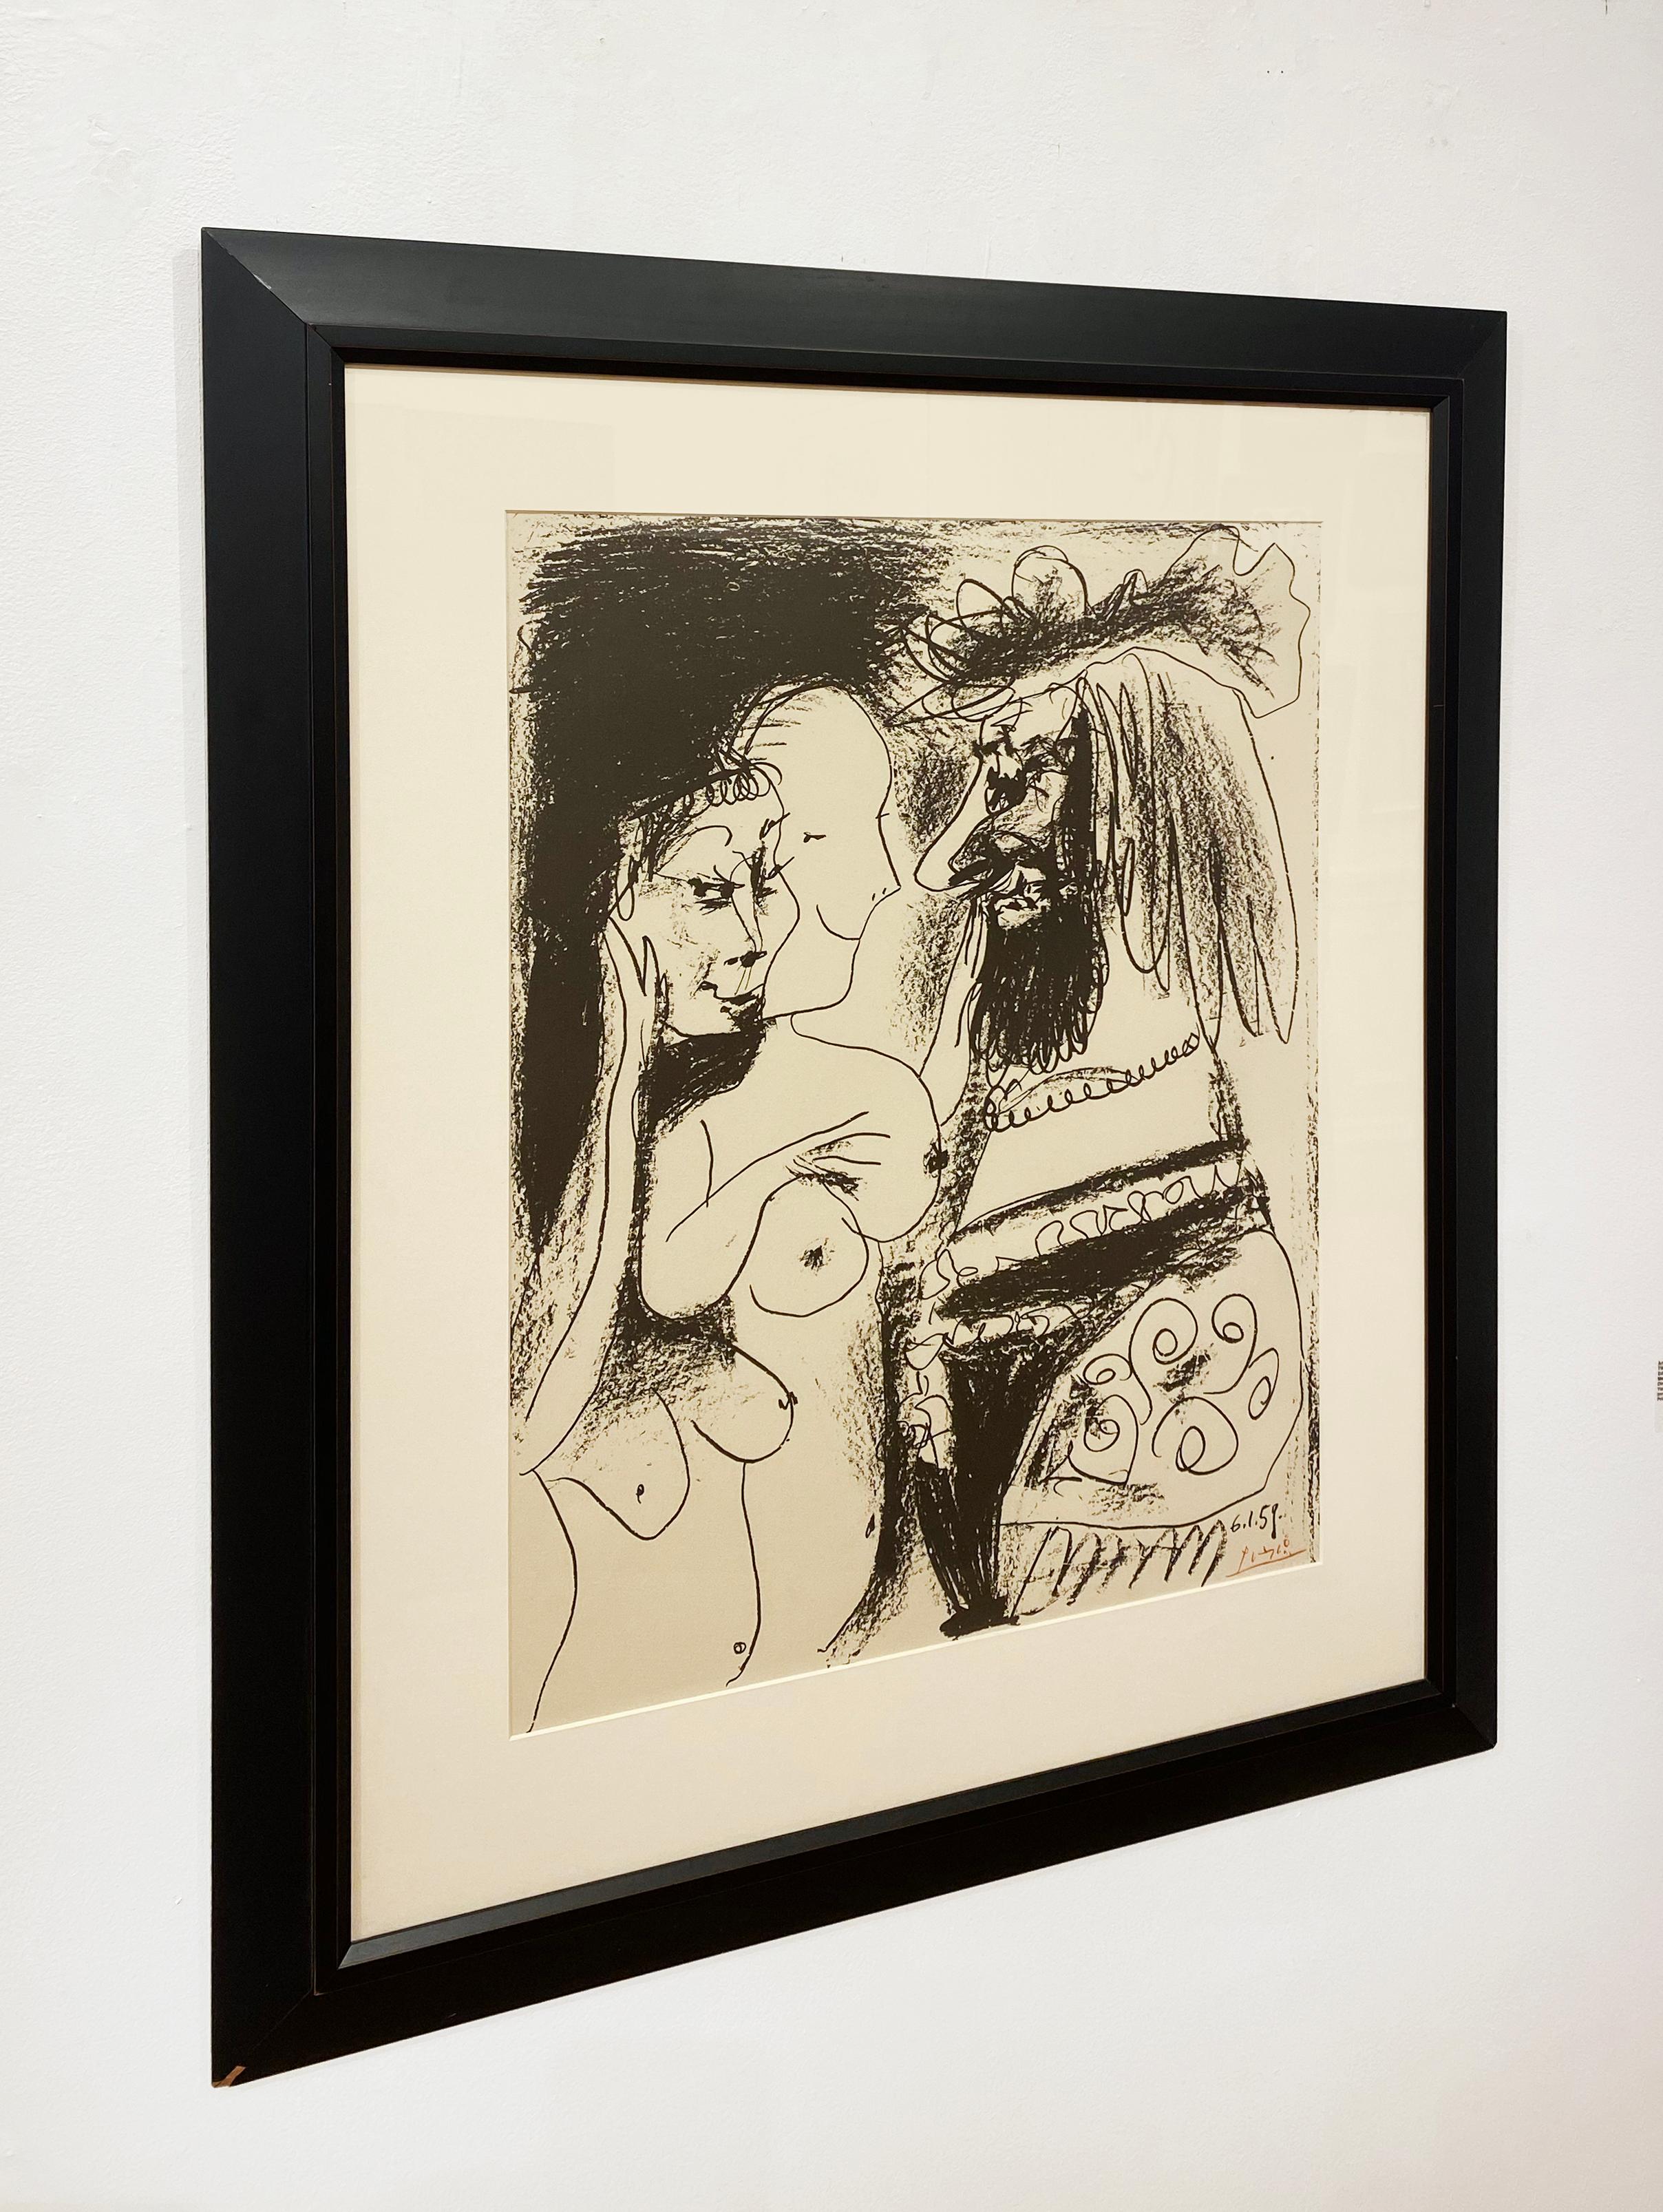 Artist:  Picasso, Pablo
Title:  The Old King (Le Vieux Roi)
Date:  1959
Medium:  Lithograph
Framed Dimensions:  37.5